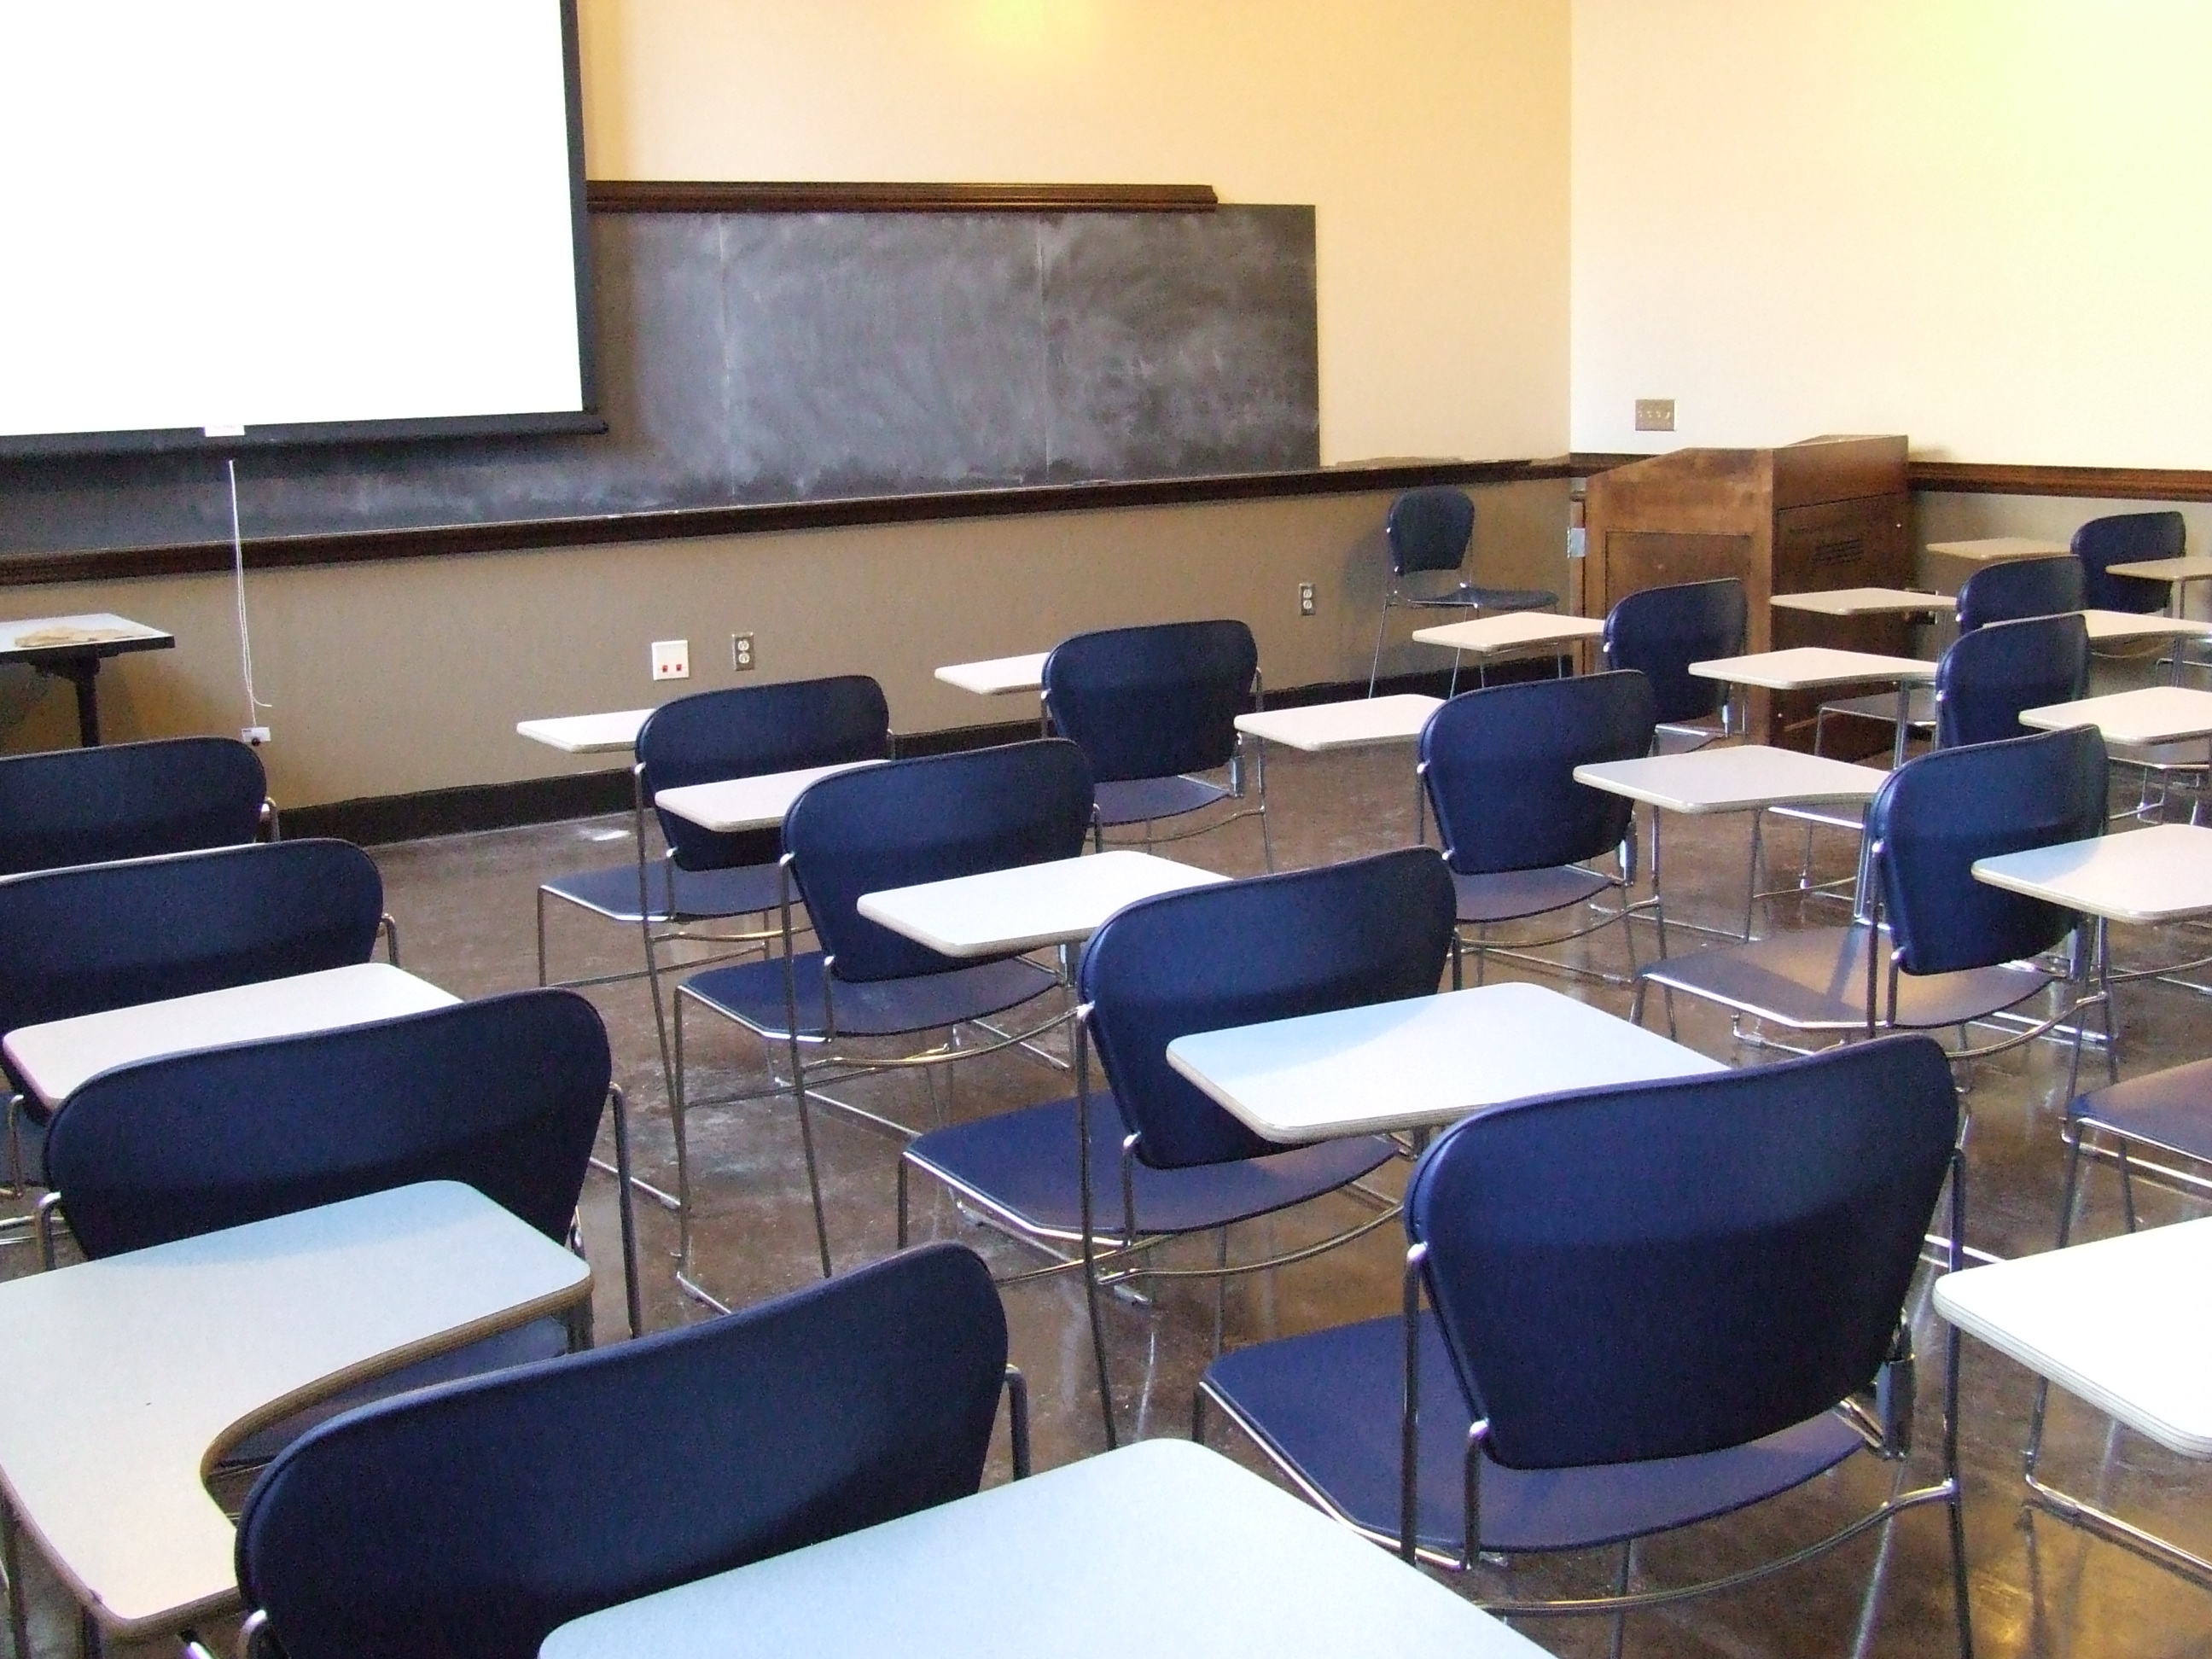 A view of the classroom with movable tableted arm chairs, chalkboard, and instructor table in front.